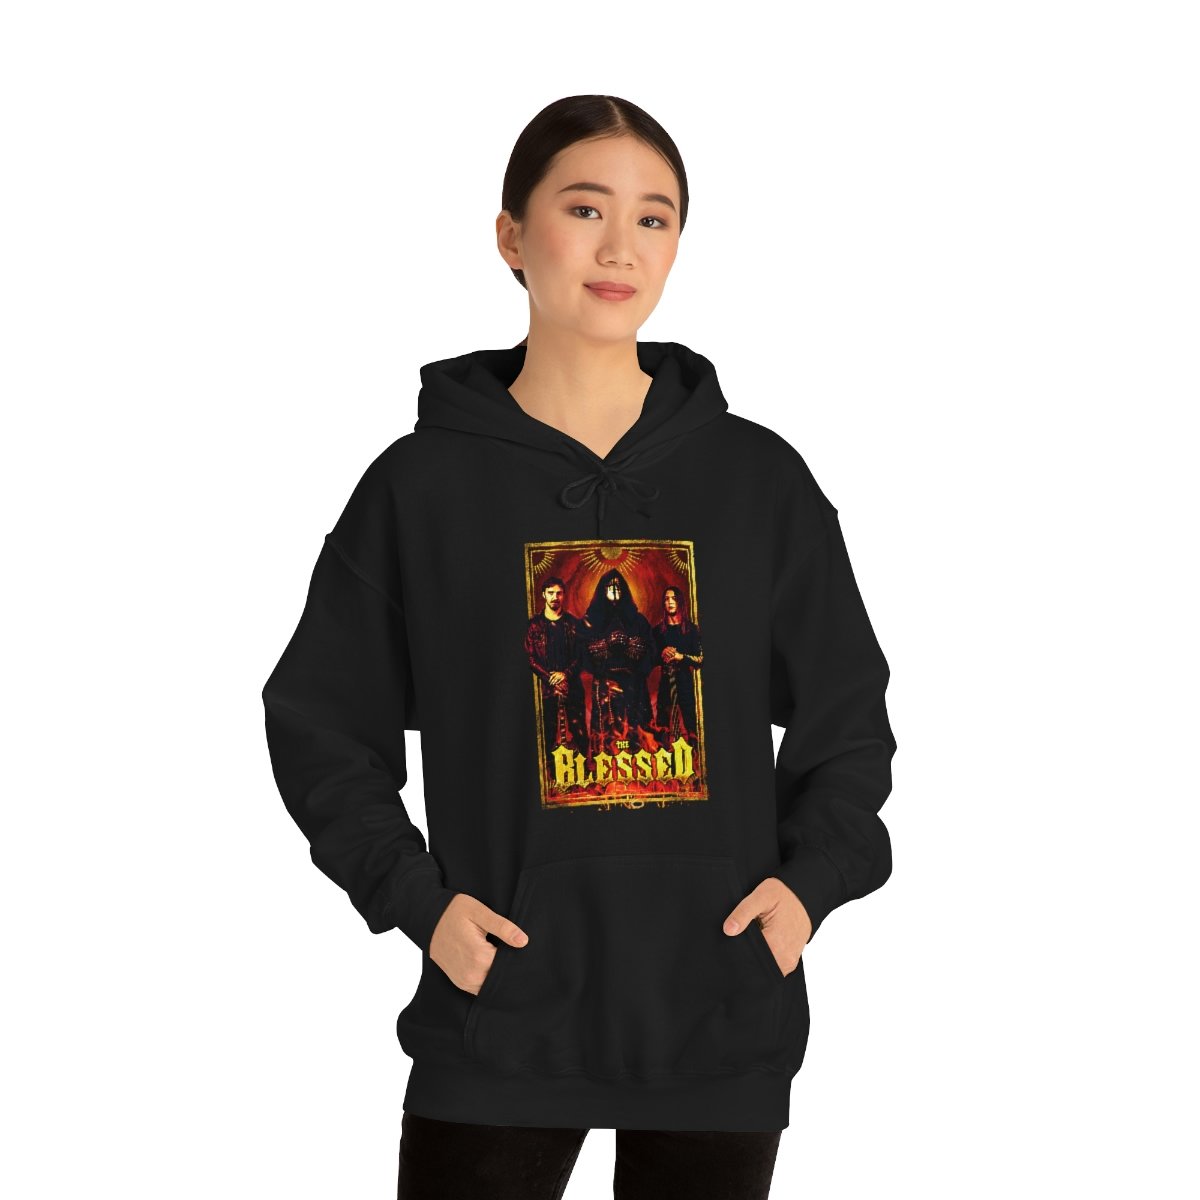 The Blessed Band Photo Pullover Hooded Sweatshirt